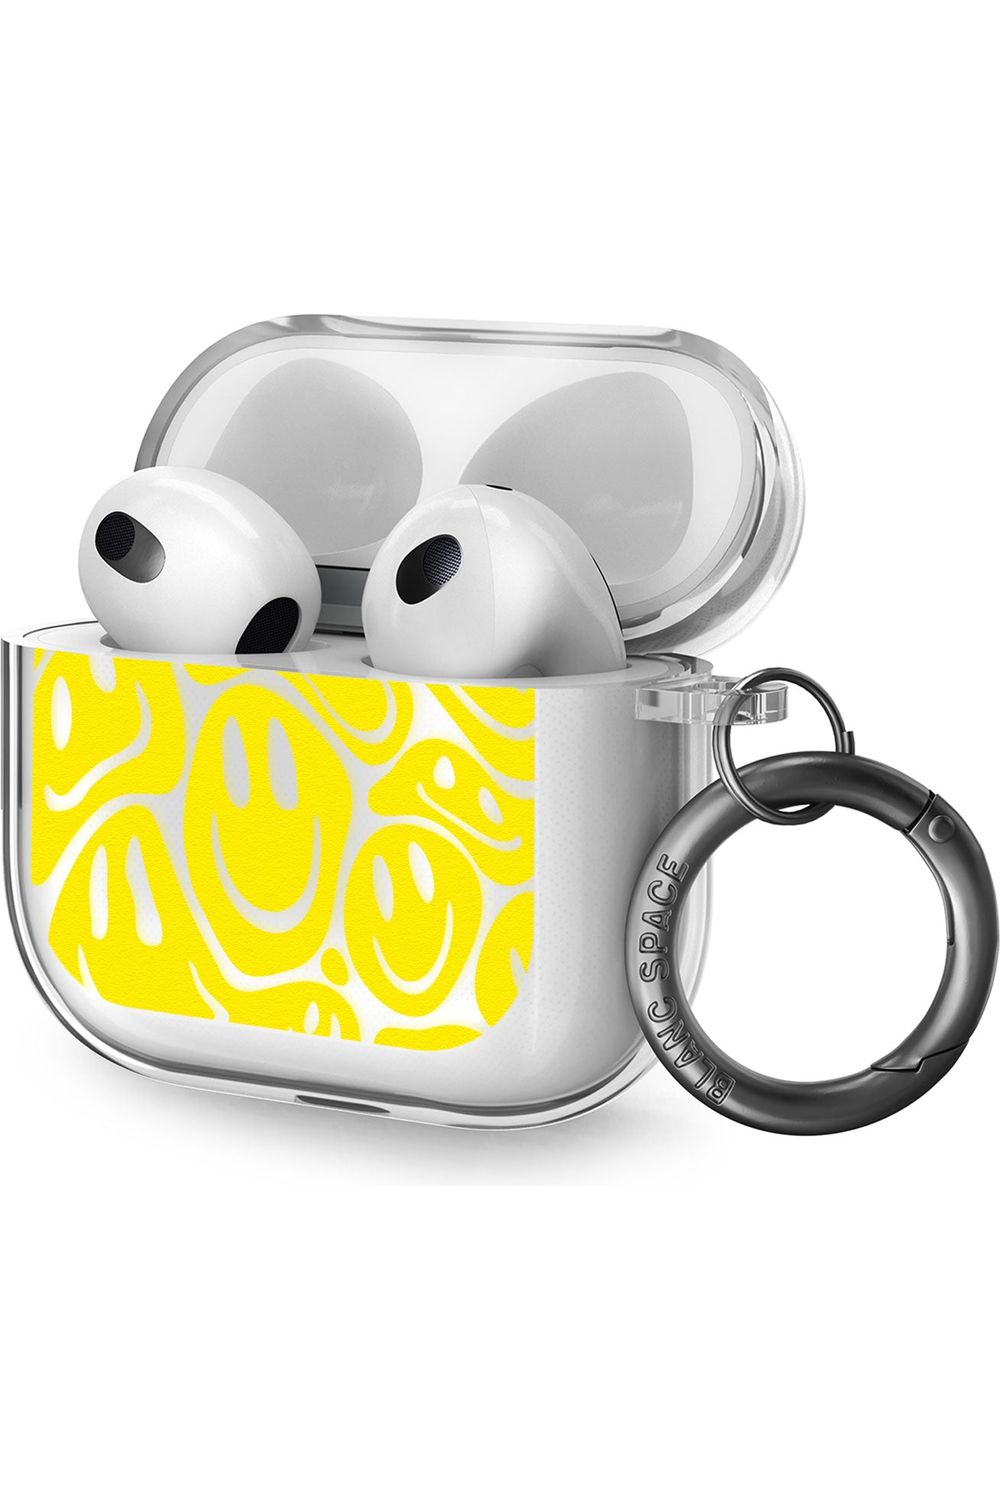 Yellow Acid Faces AirPods Case (3rd Generation)